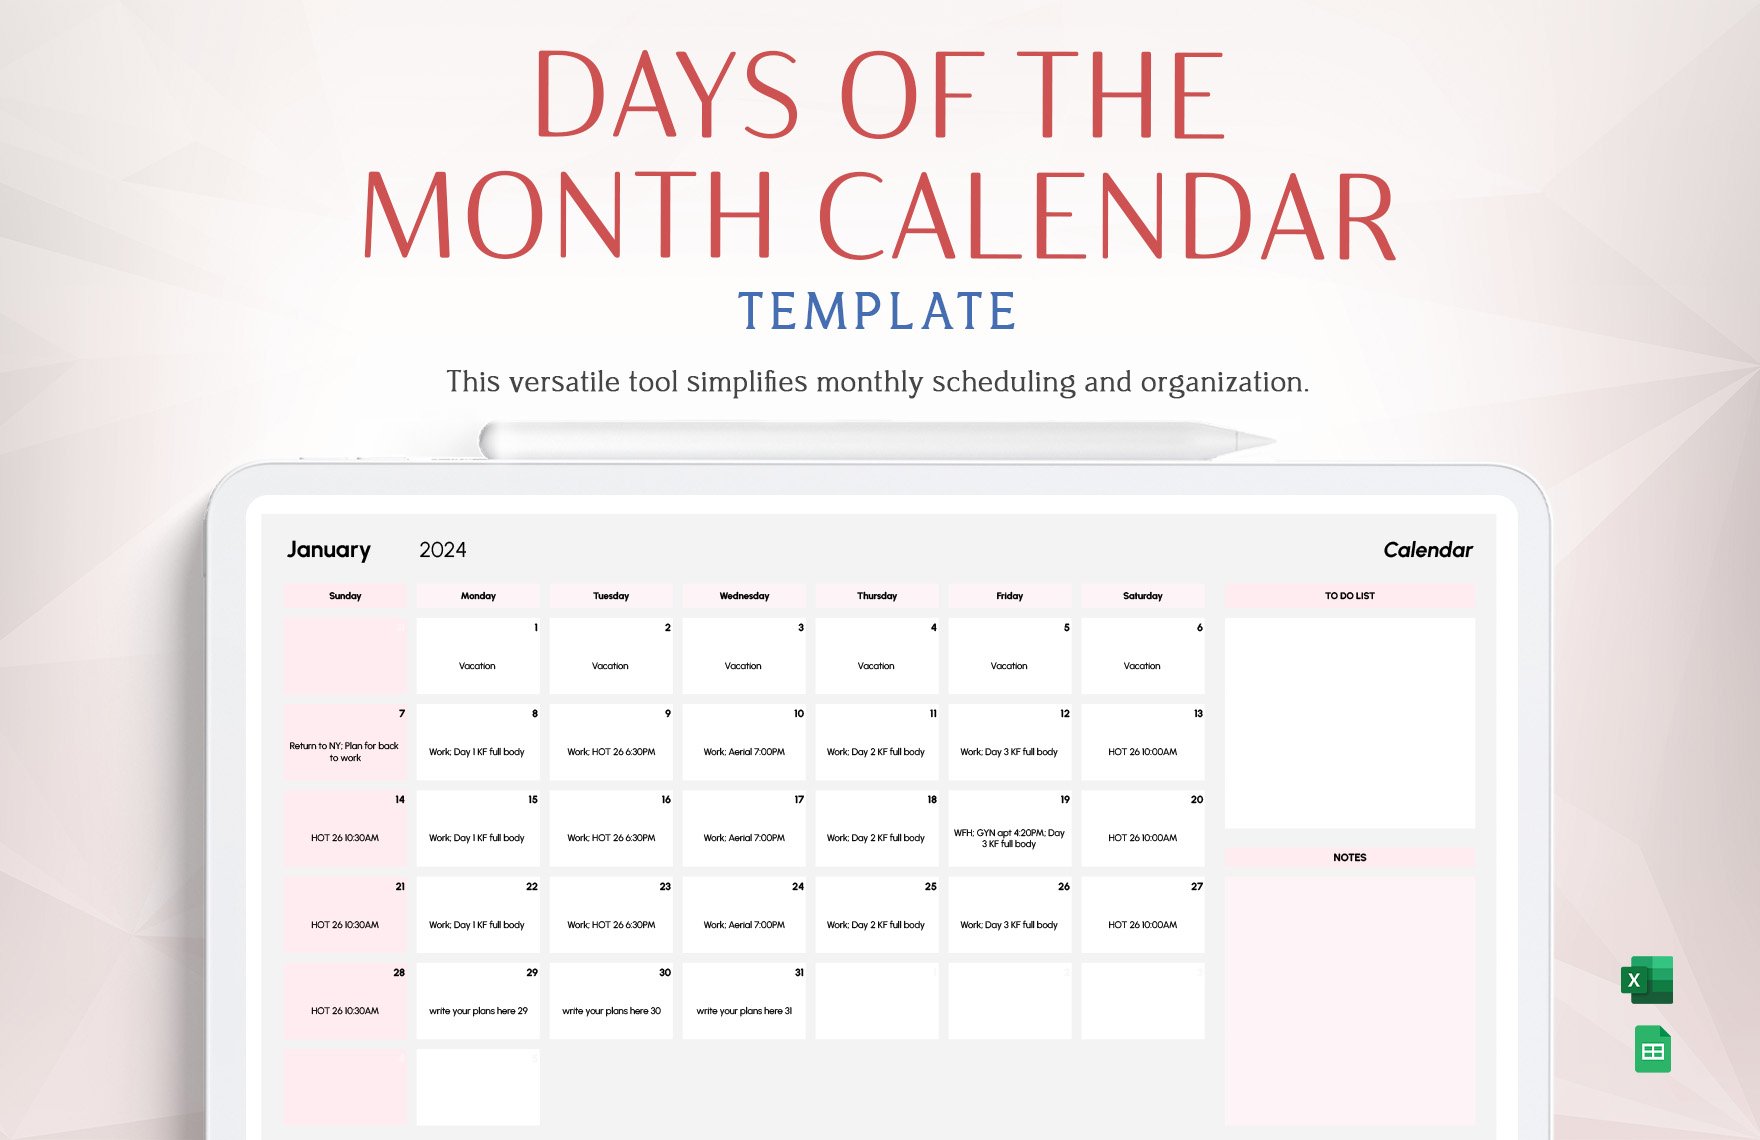 Free Days of a Month Calendar Template in Excel, Google Sheets